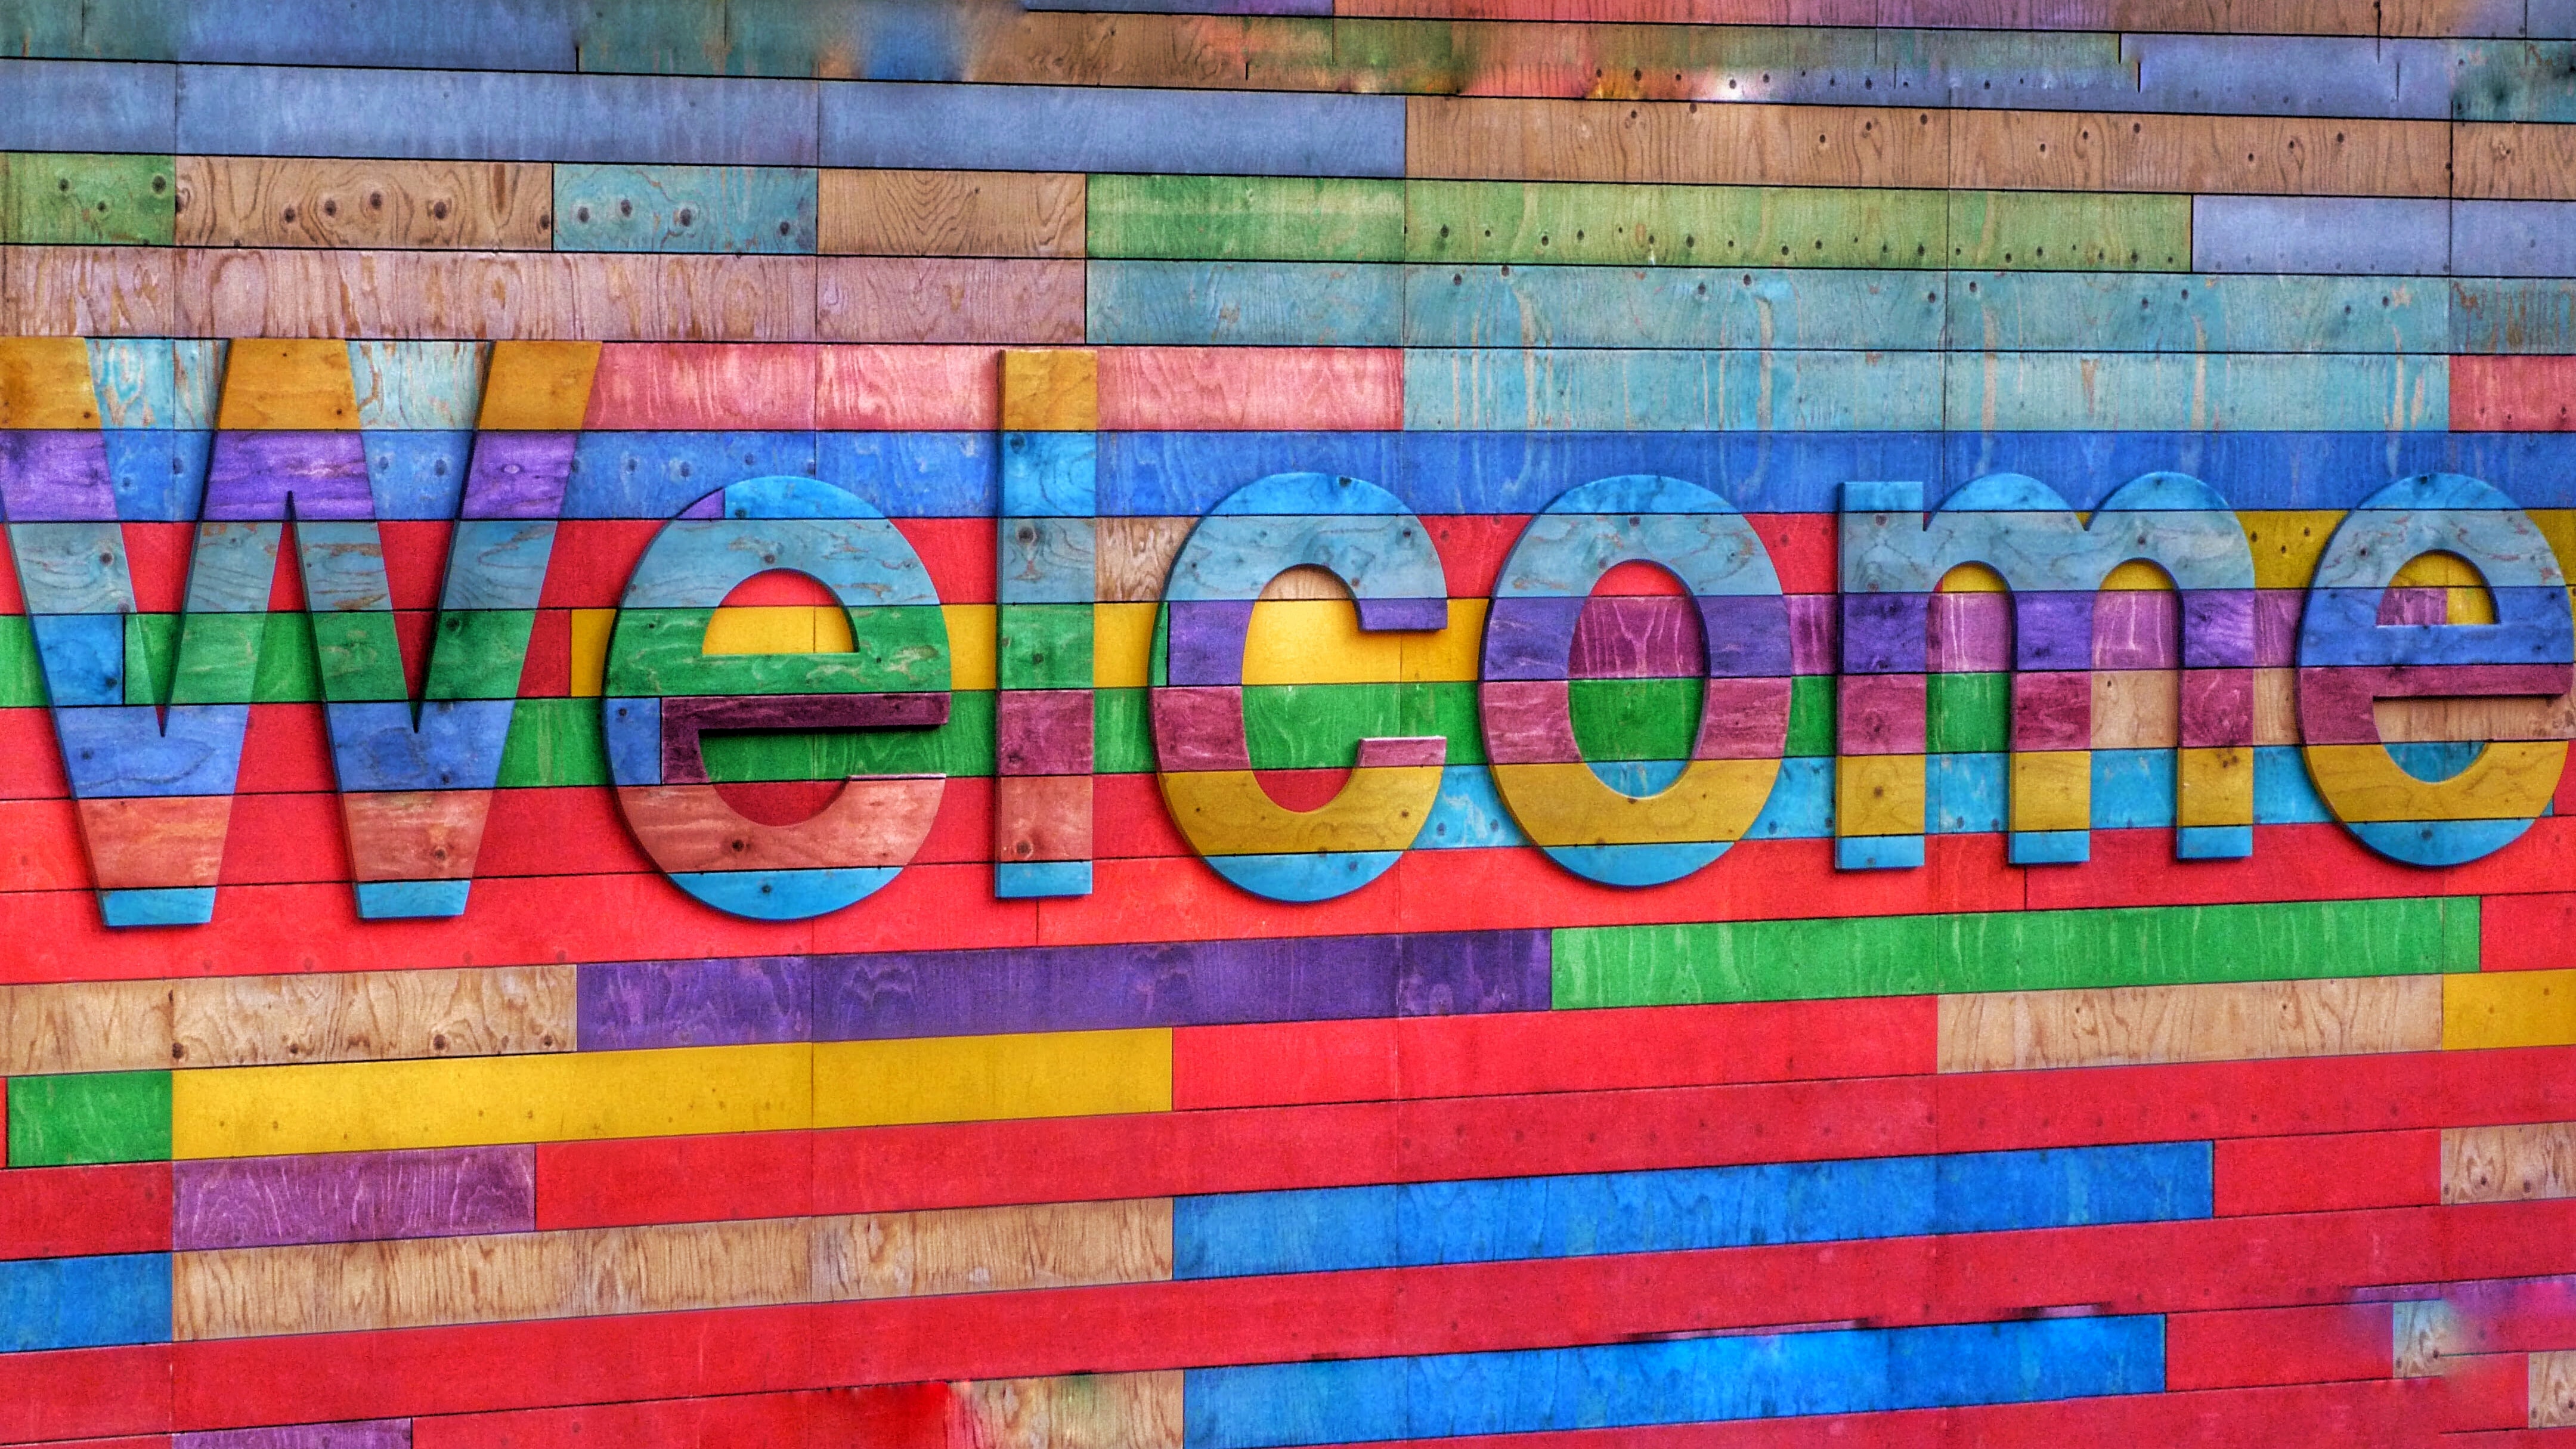 3D painting of the word Welcome in several colors; image by Belinda Fewings, via Unsplash.com.